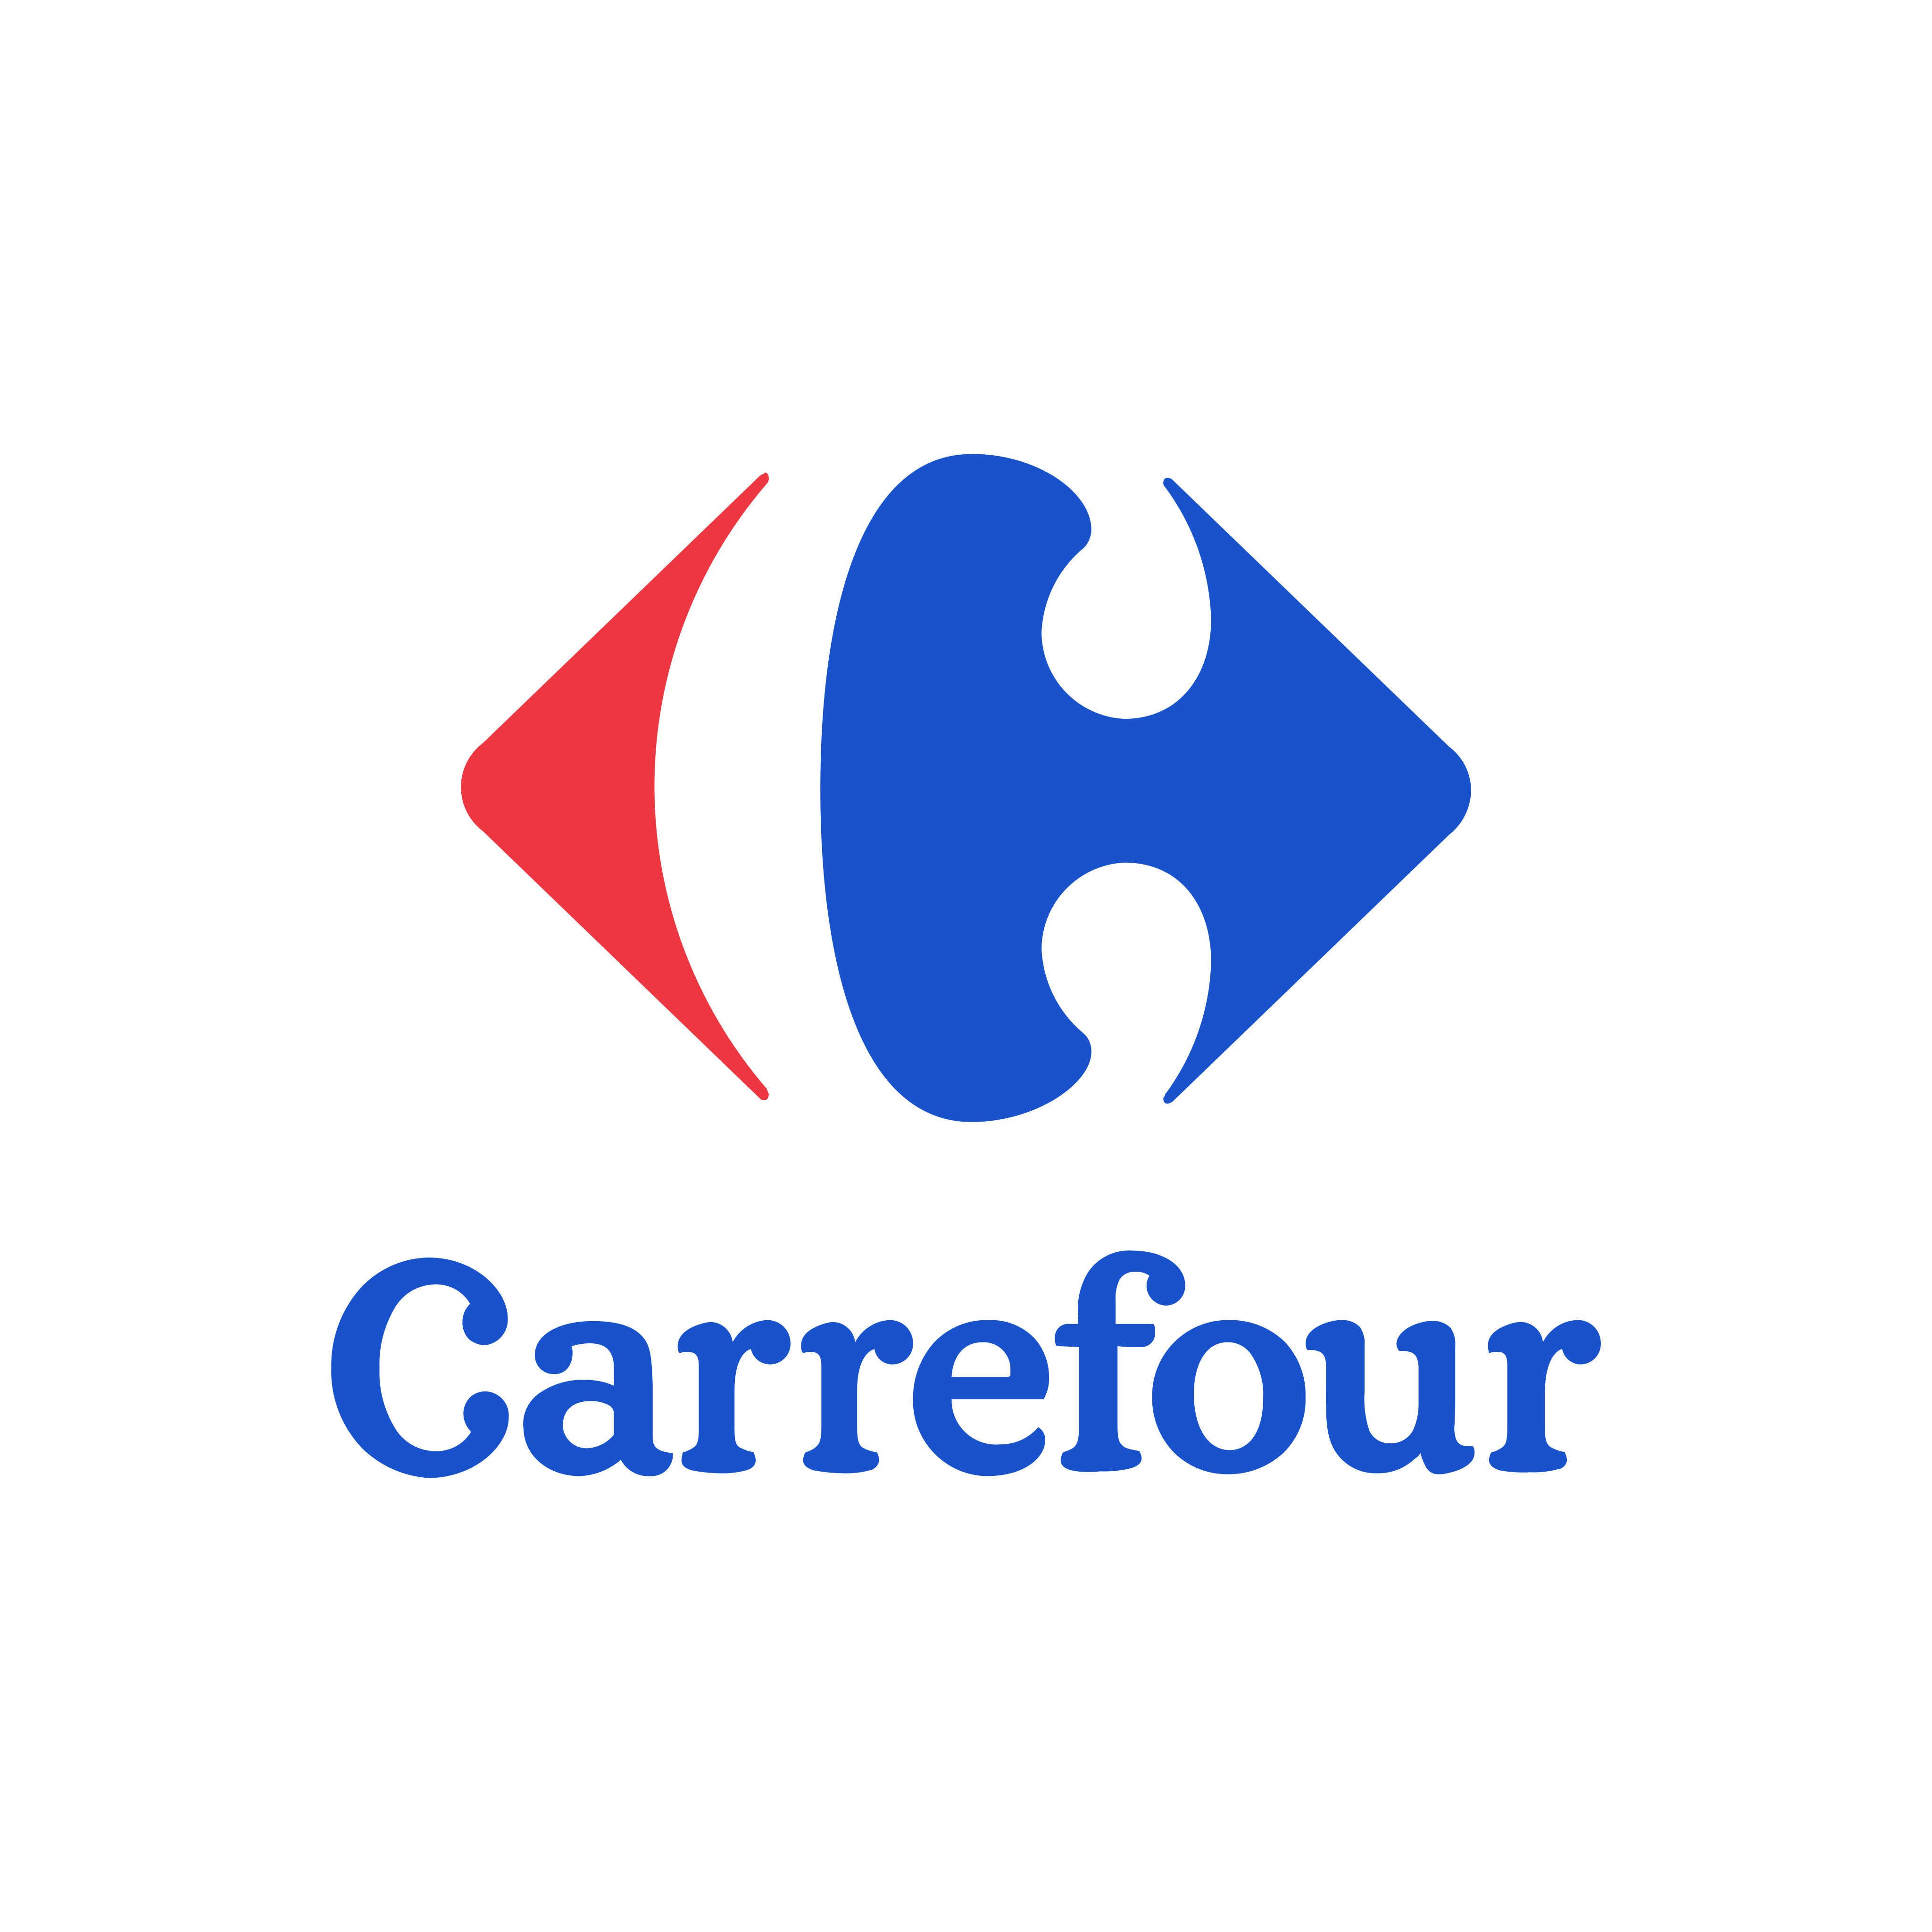 Carrefour | Brands Of The Wor